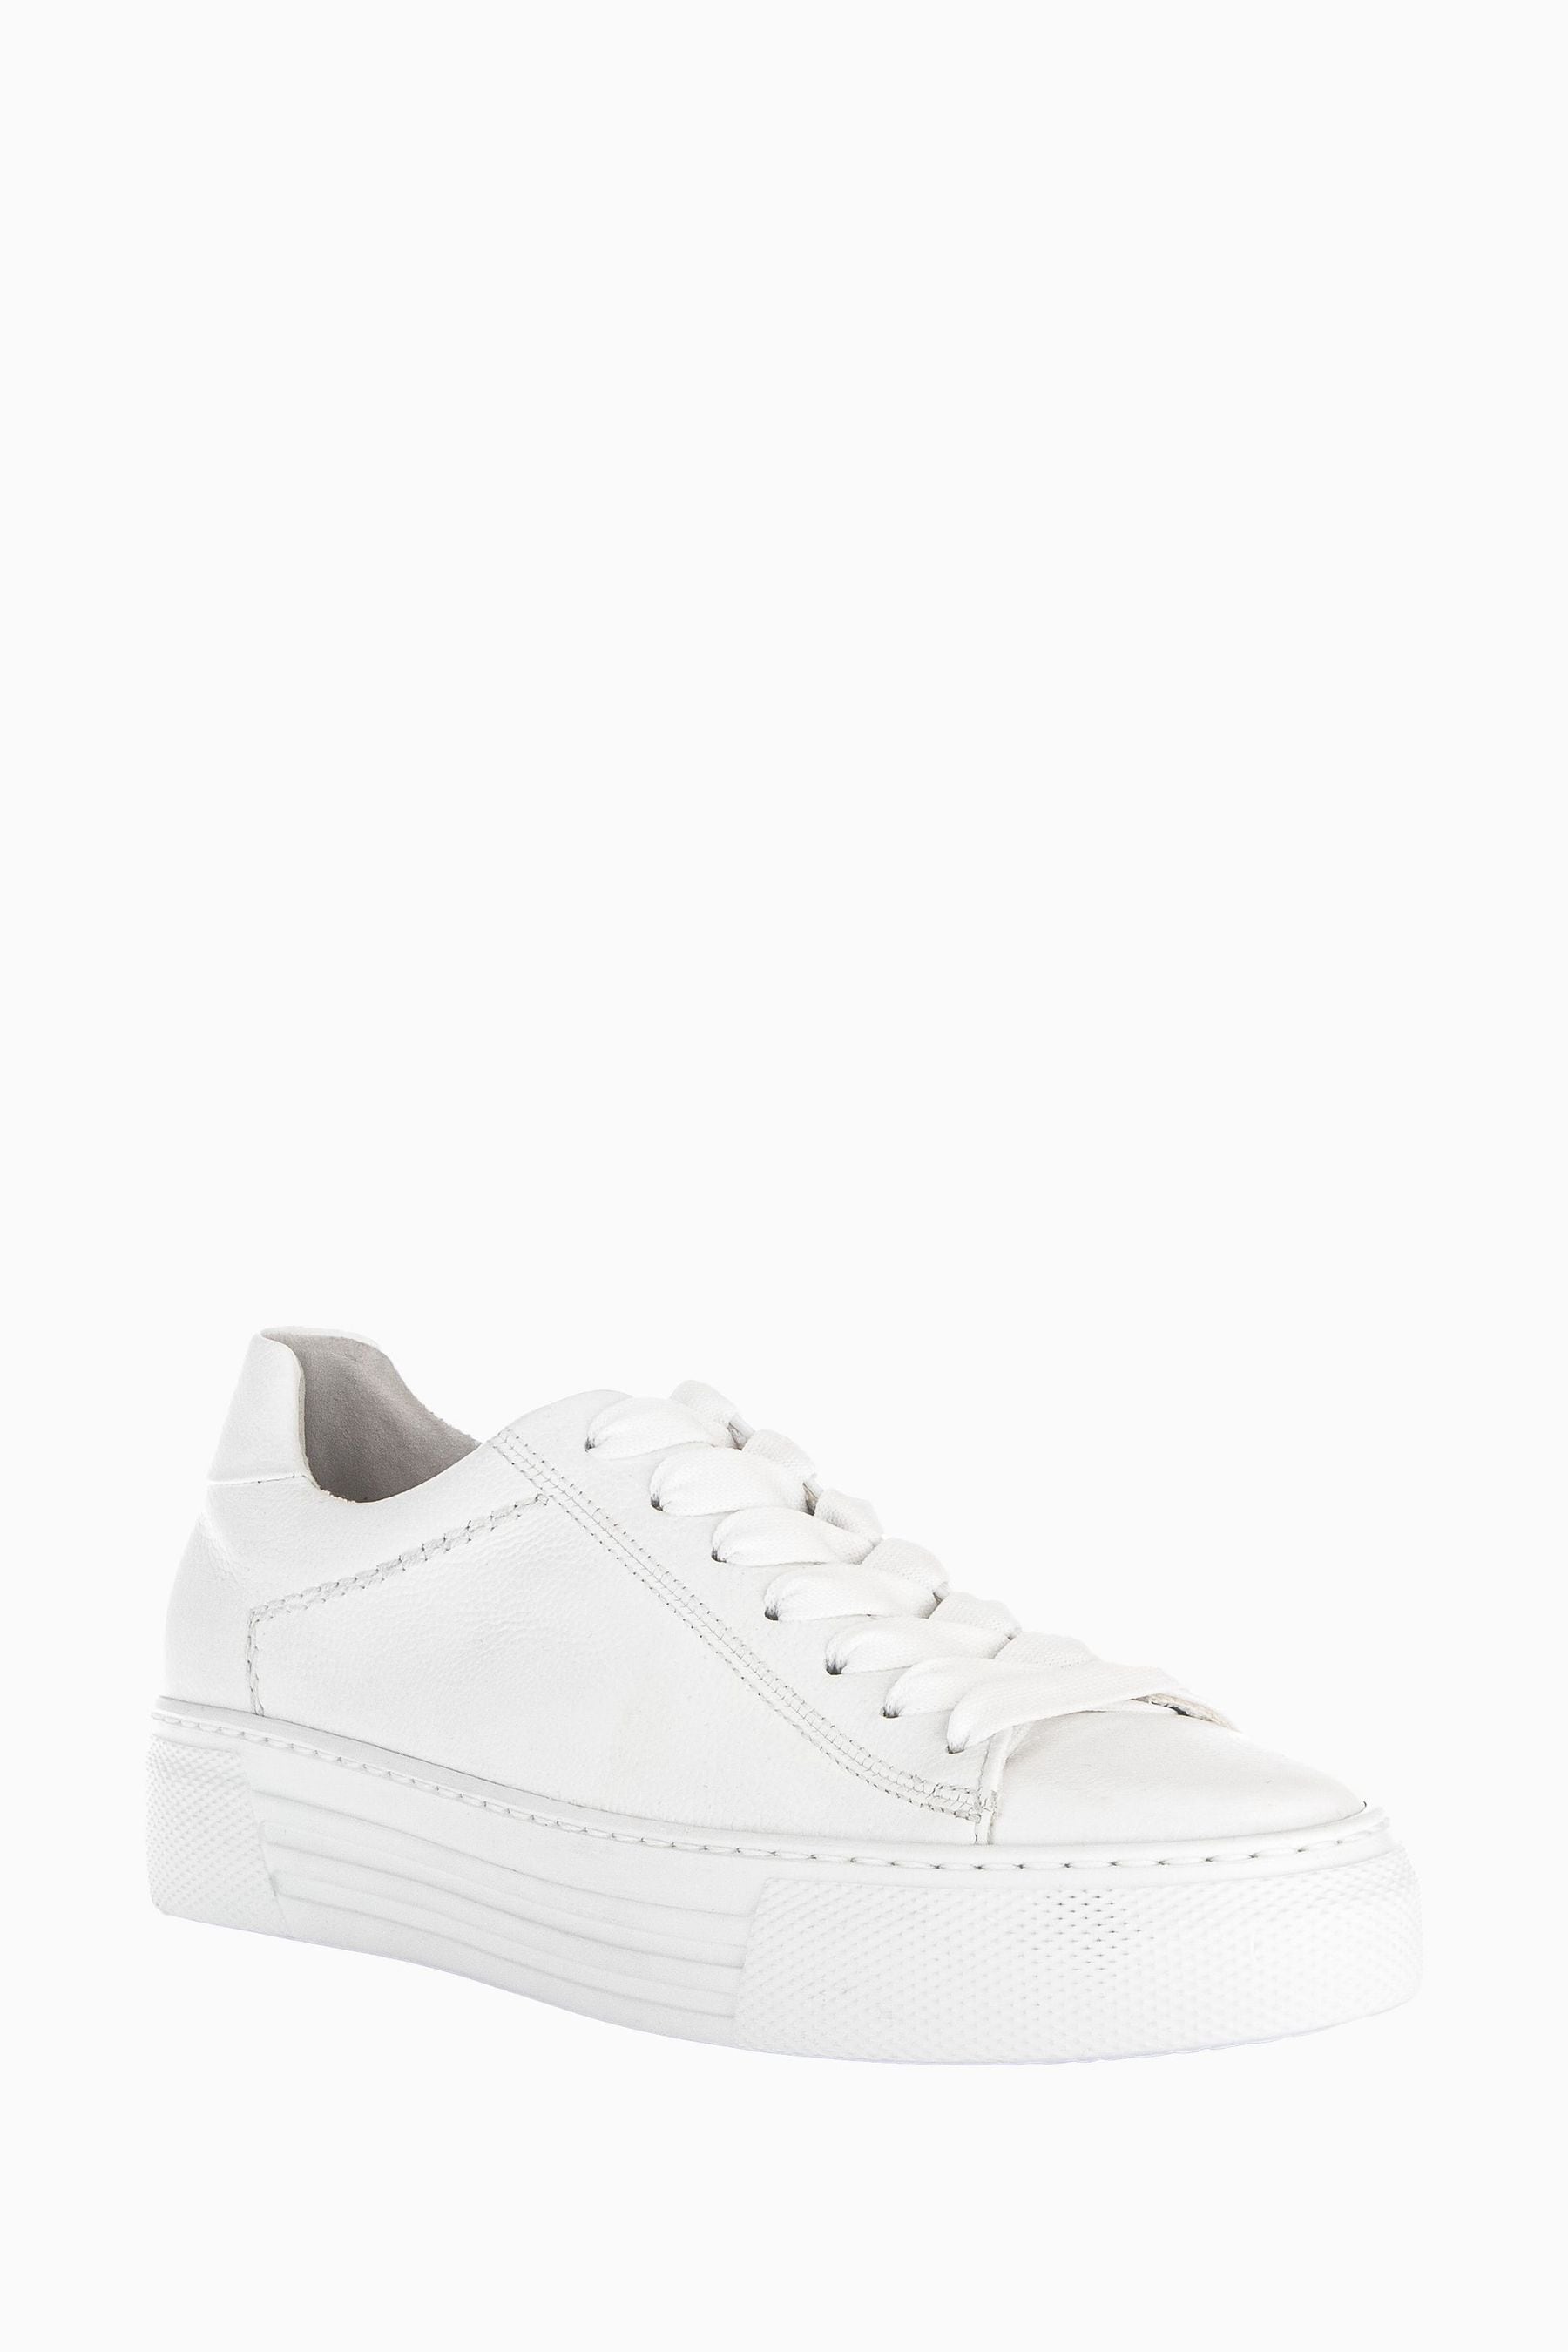 Buy Gabor Camrose White Leather Casual Trainers from the Next UK online ...